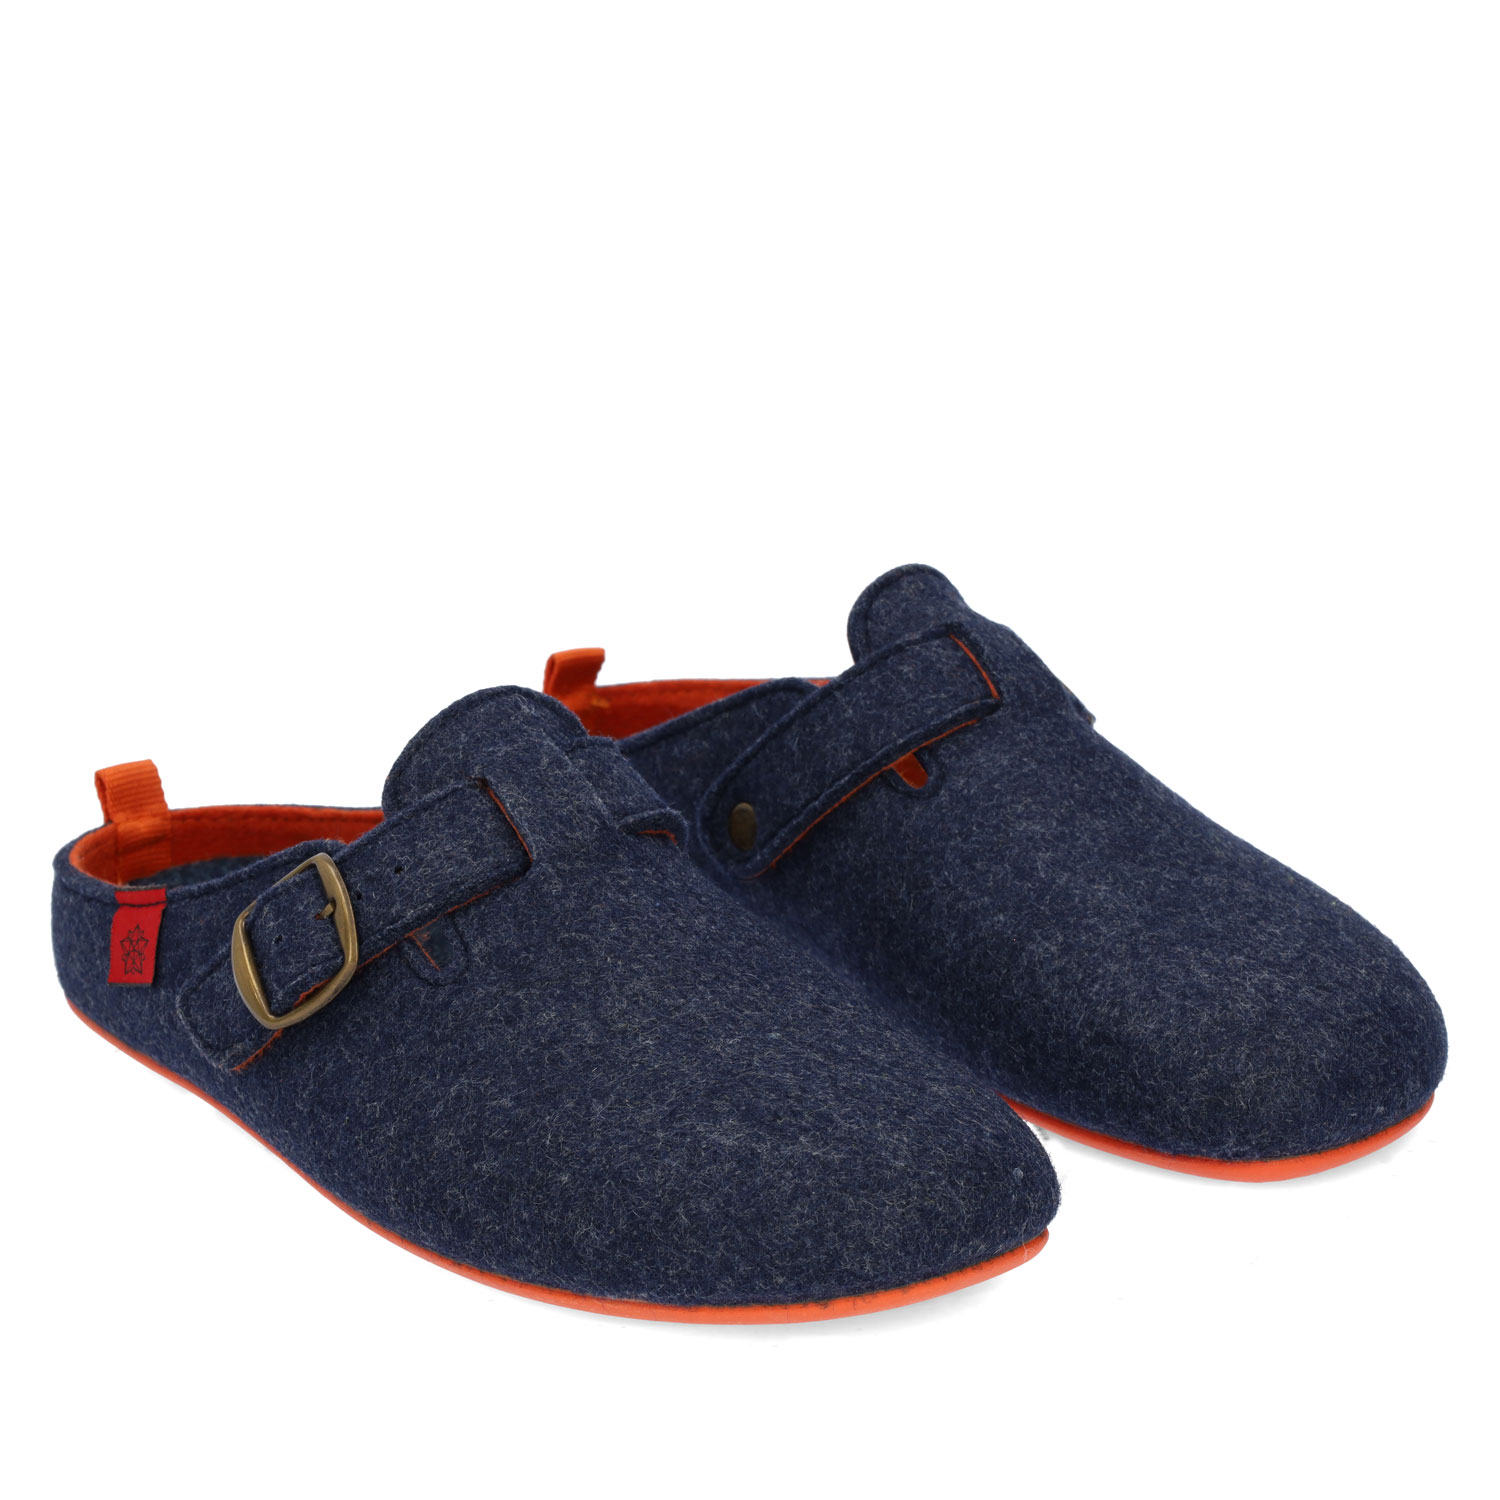 Unisex home slippers in blue felt and buckle detail 